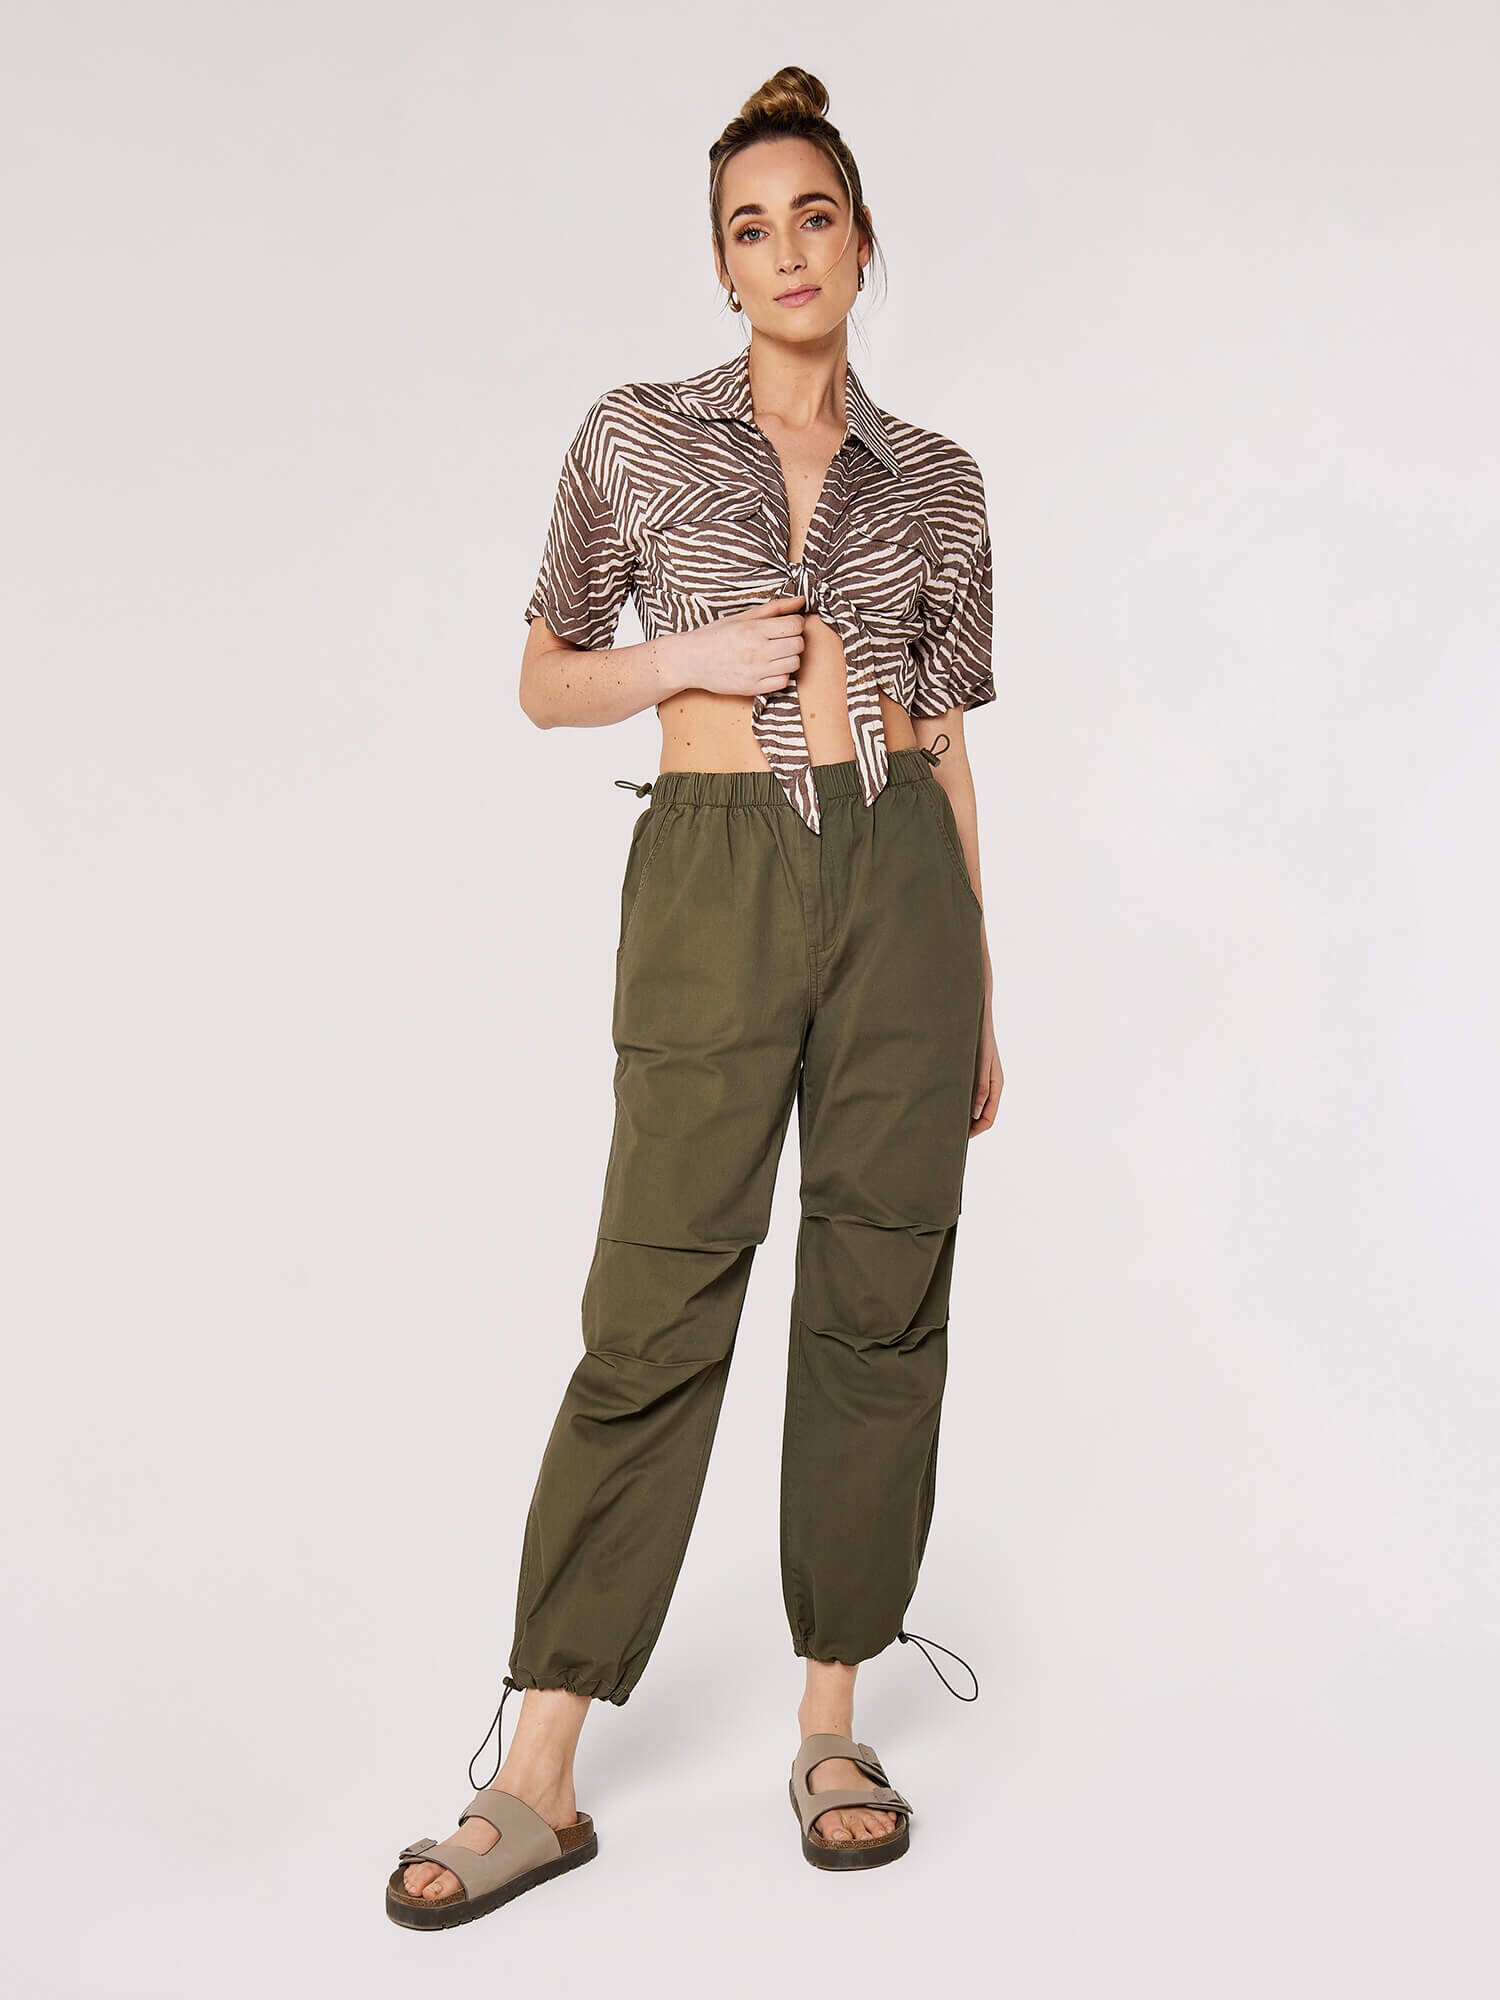 Luna High Waist Cargo Trousers  Trousers  Shorts from Yumi Clothing UK